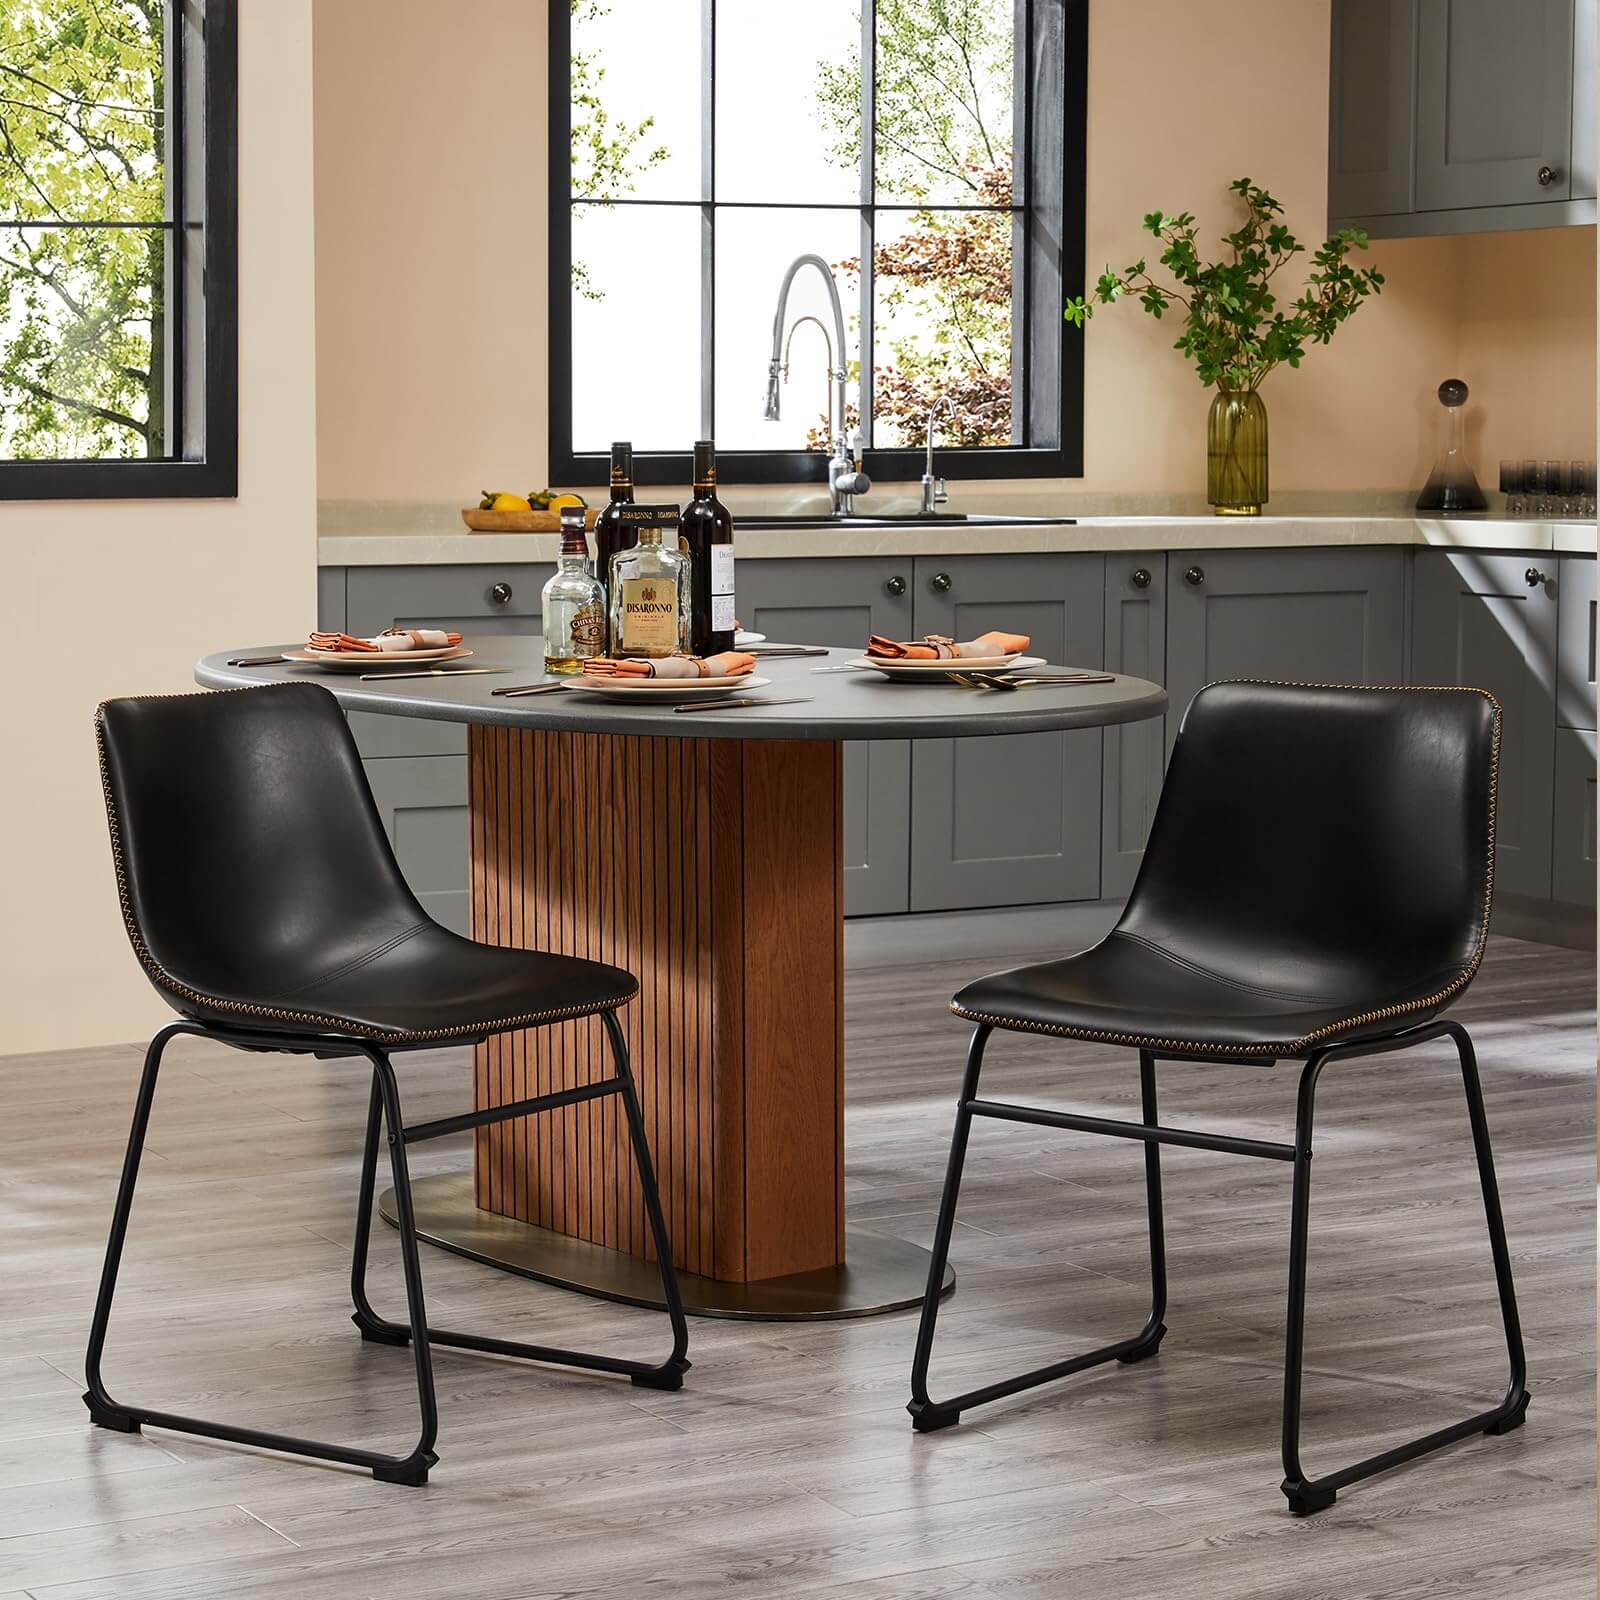 26-inch-dining-chairs#Color_Black#Size_18 in